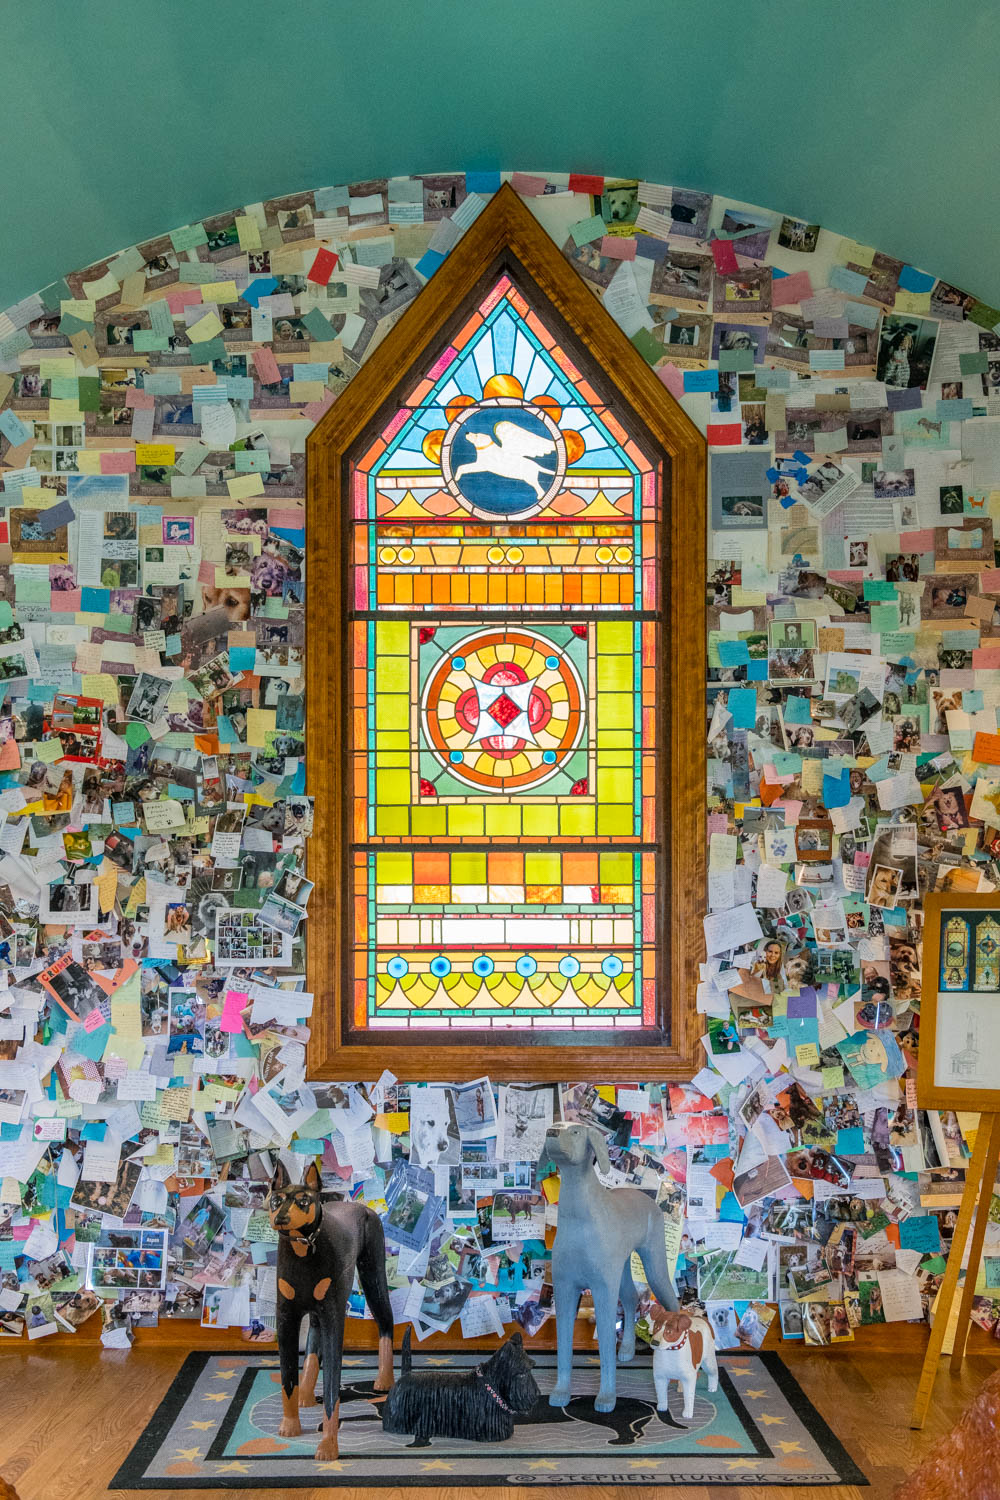 Stained Glass Window inside Dog Chapel in St. Johnsbury, VT, taken  by Accidentally Wes Anderson